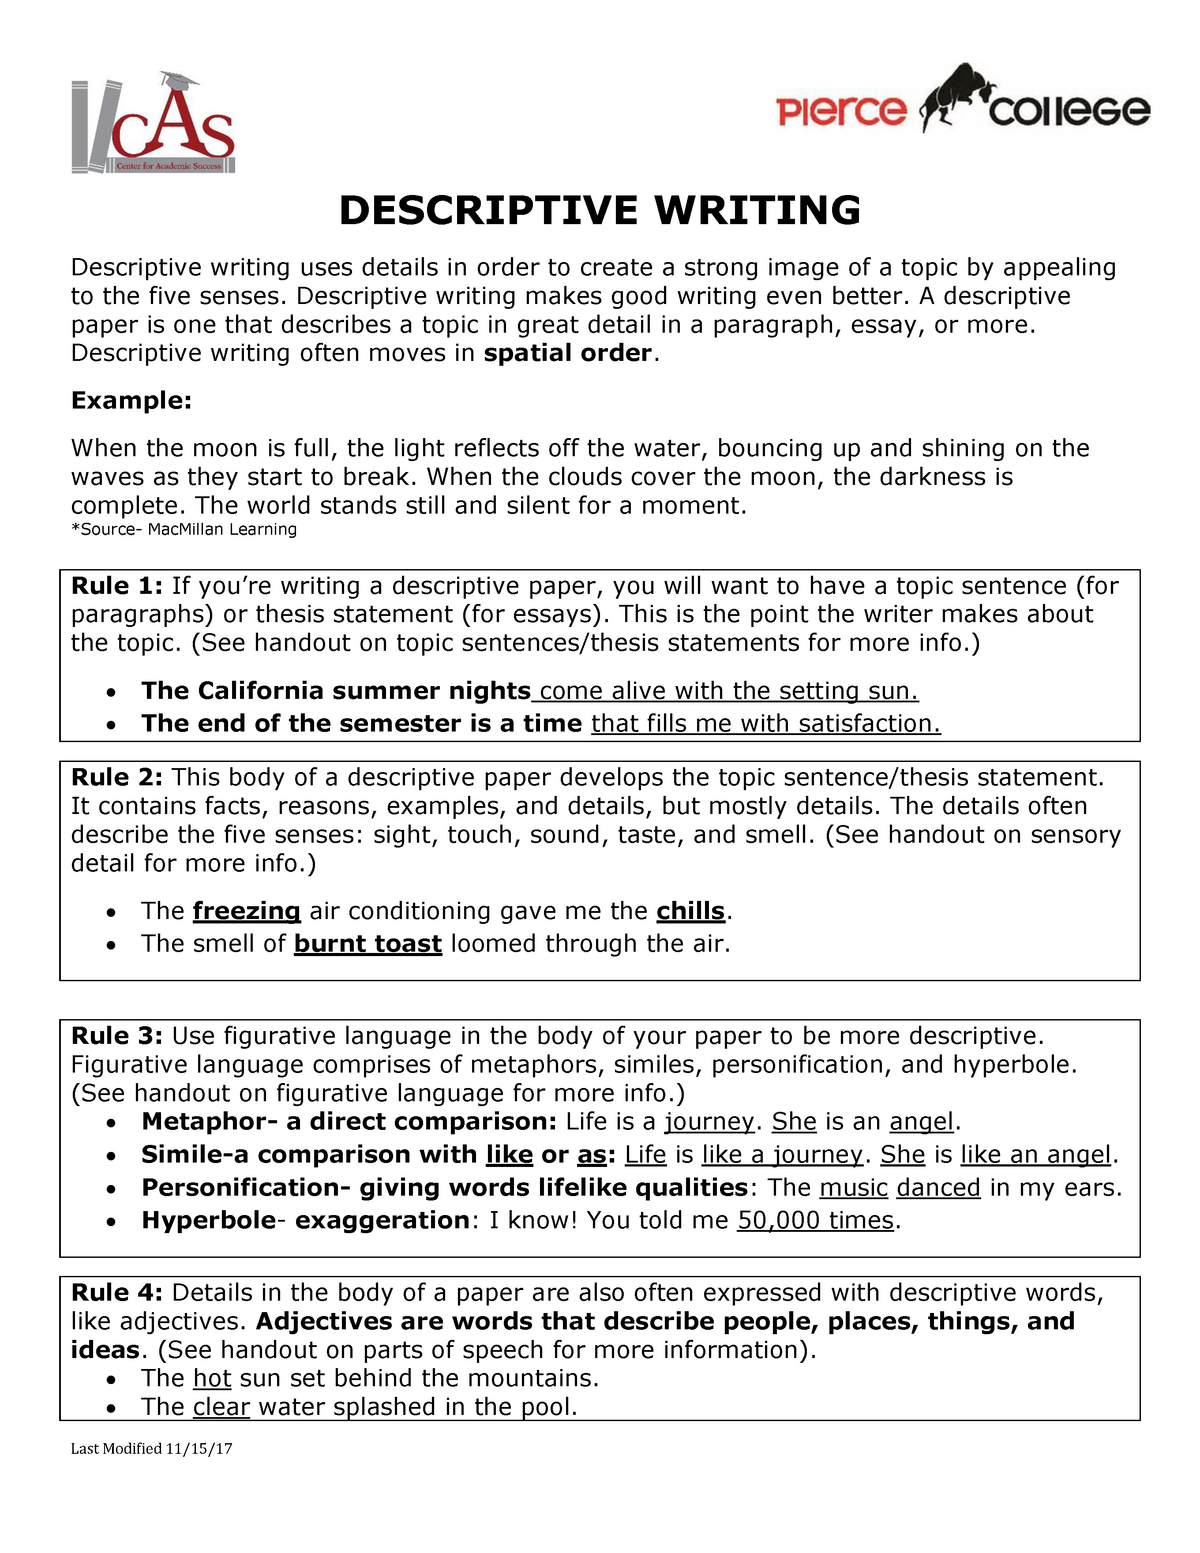 Places to write about in a descriptive essay